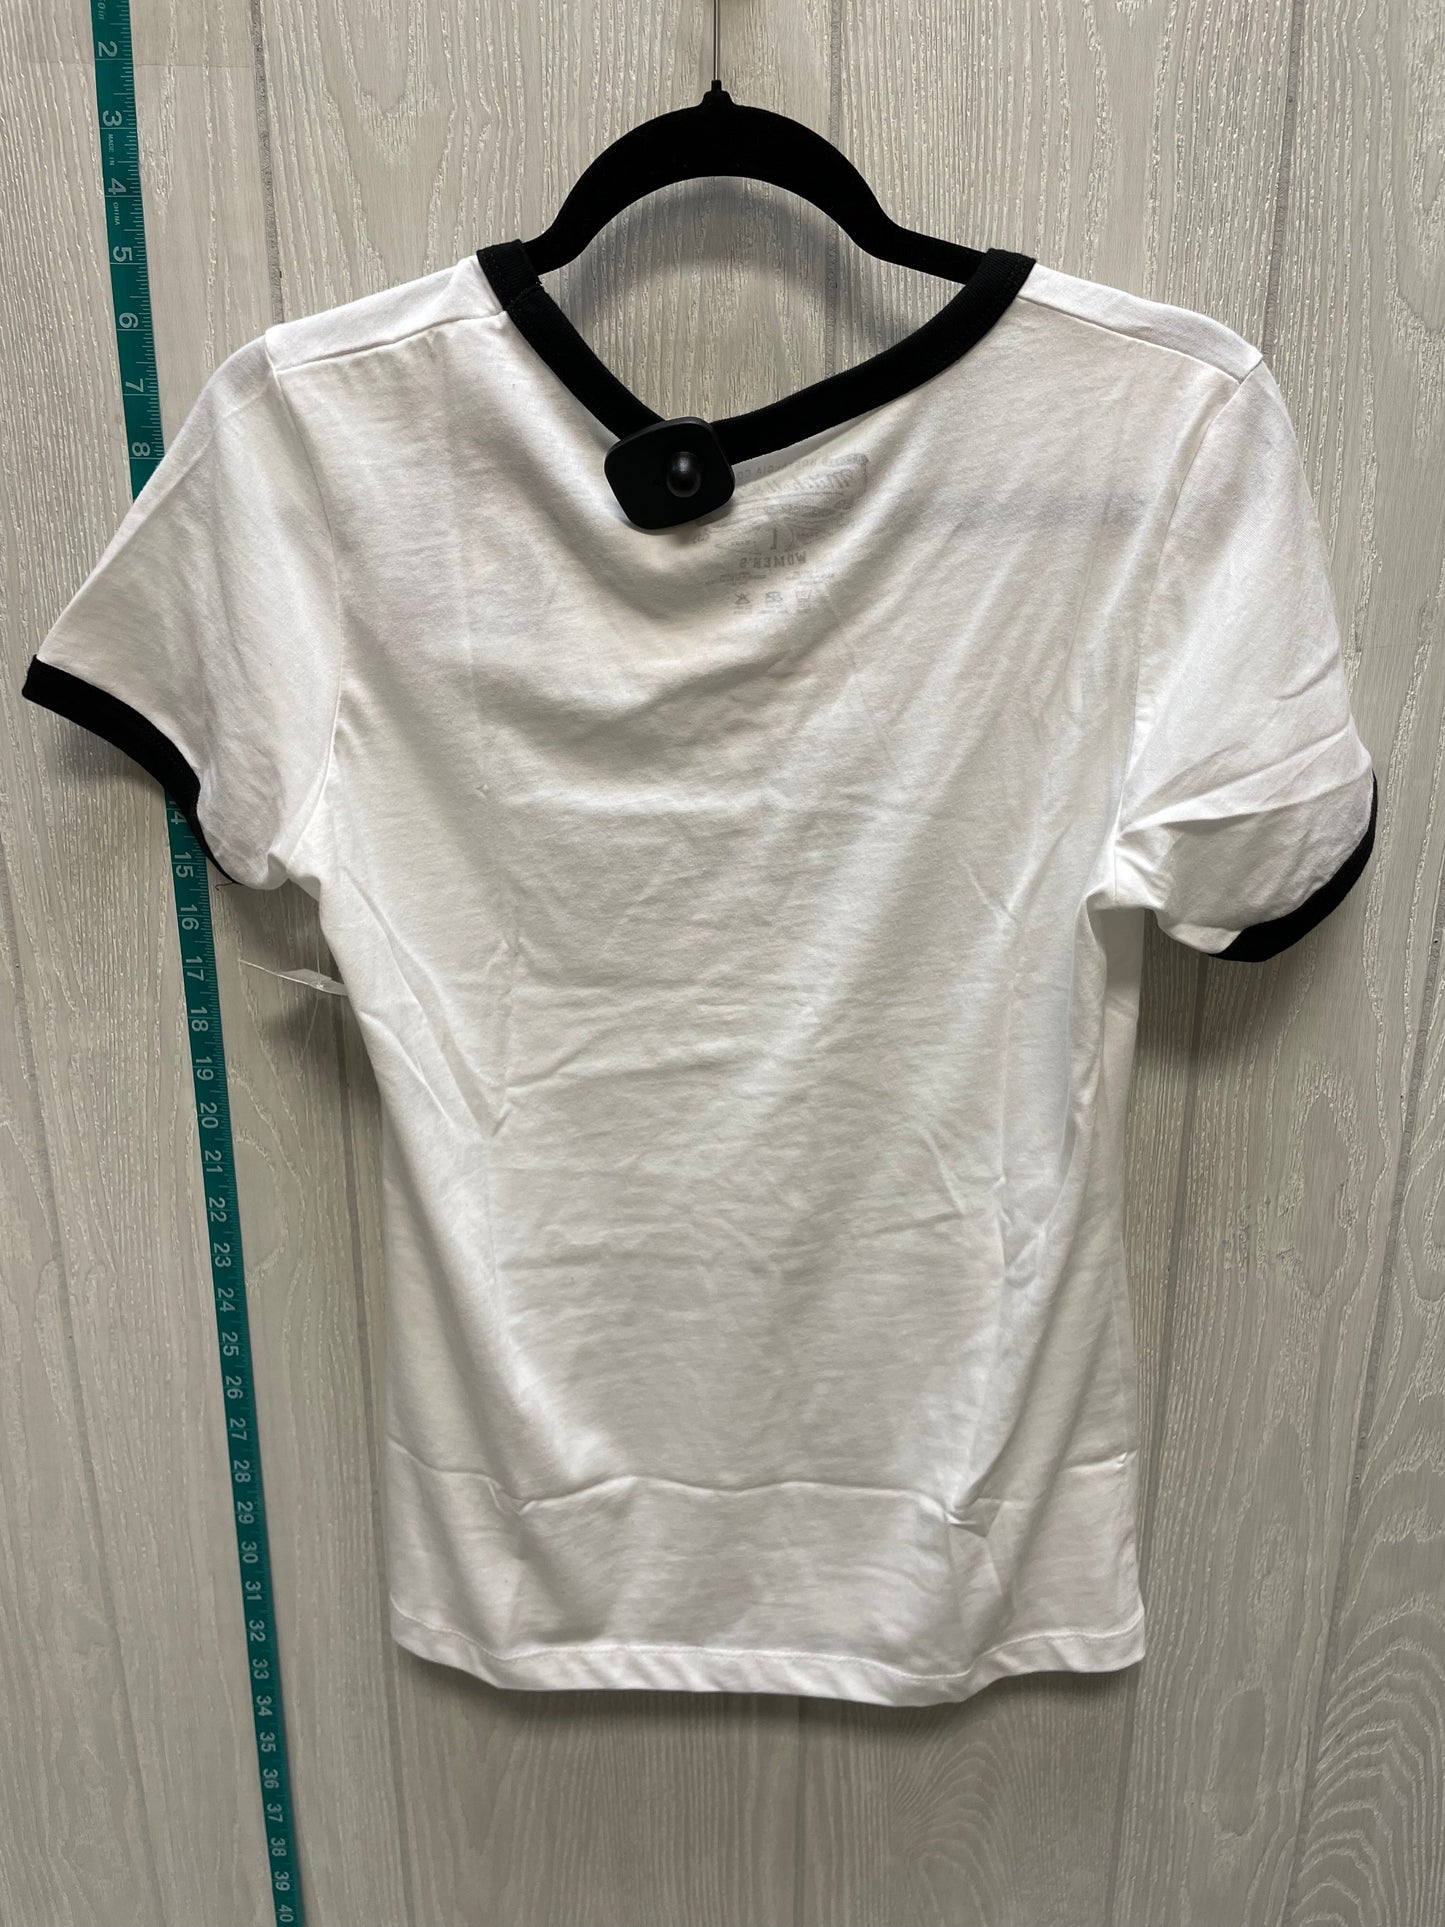 Black & White Top Short Sleeve Clothes Mentor, Size L